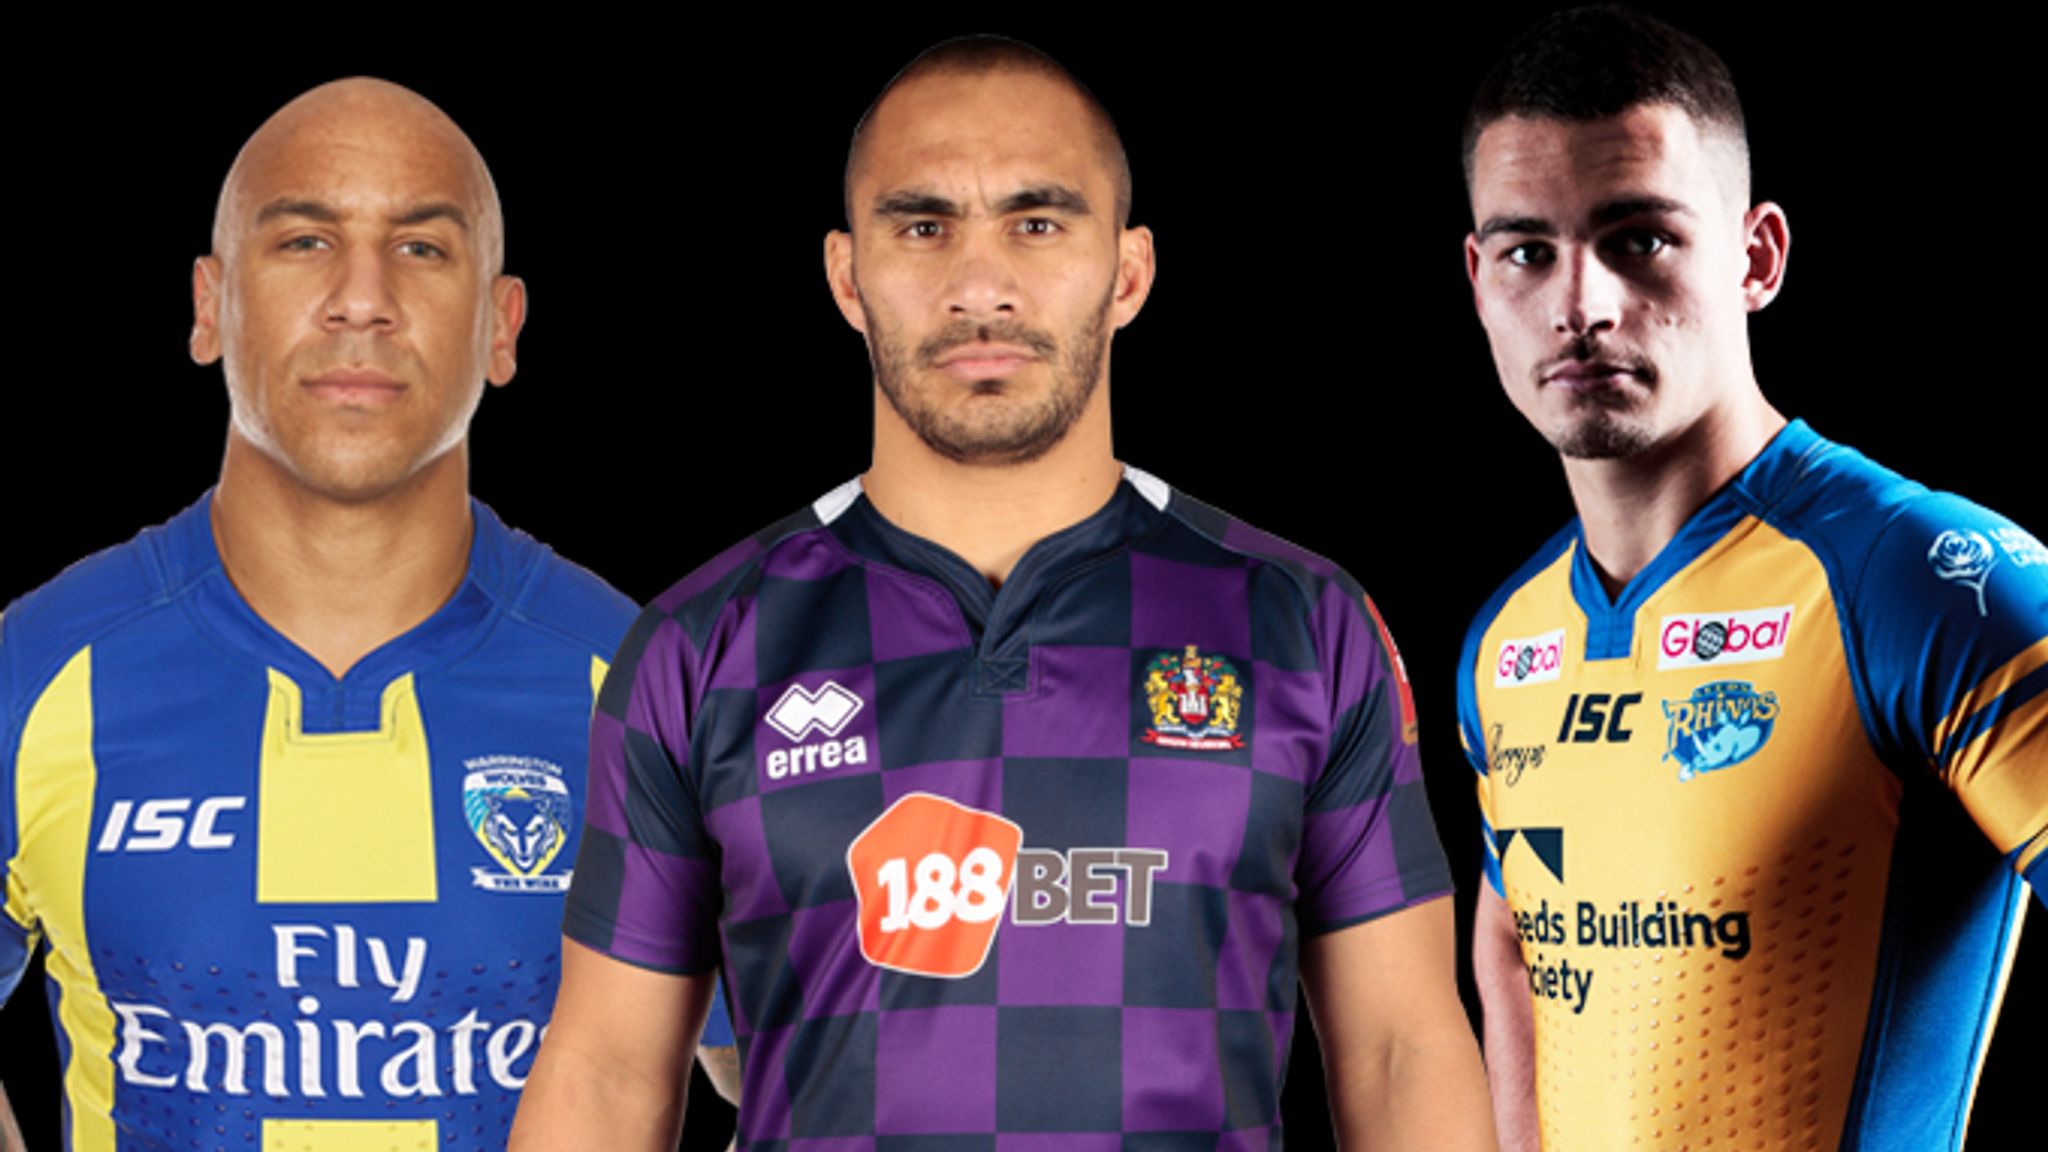 Rugby League Kits & Jerseys